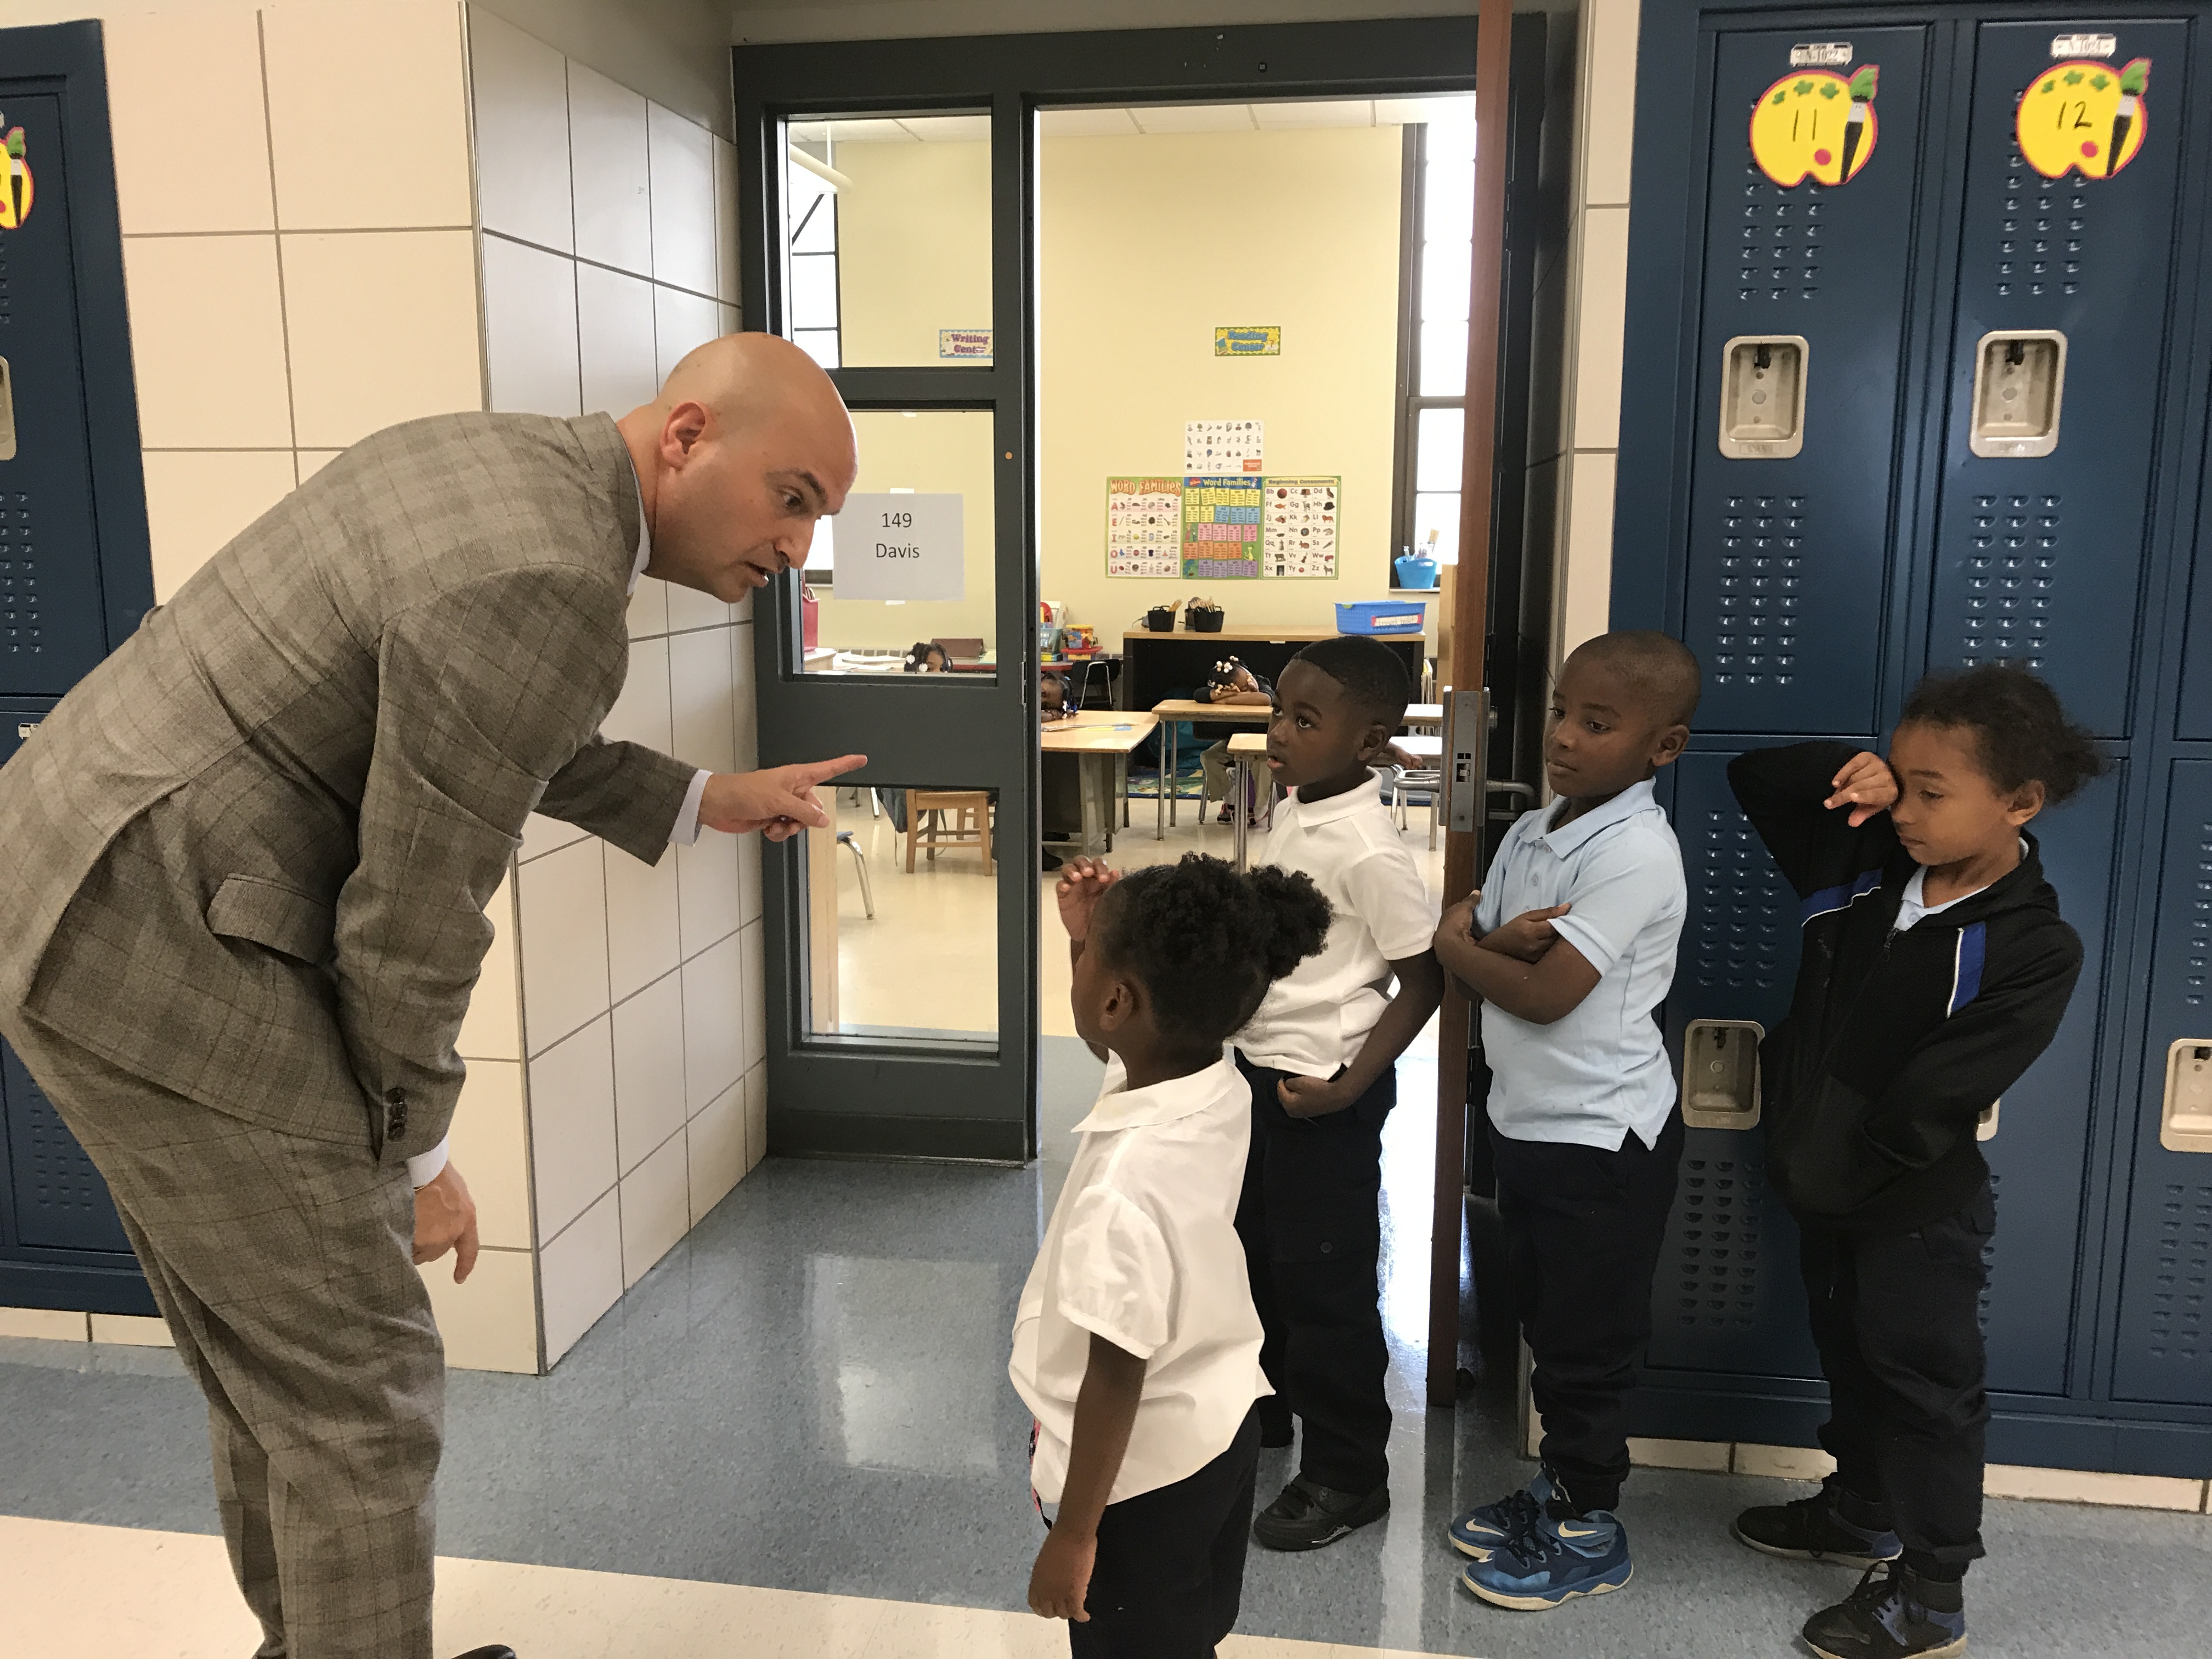 Detroit supertintendent Nikolai Vitti talks with students at Durfee Elementary/Middle School on the first day of school, September 5, 2017.